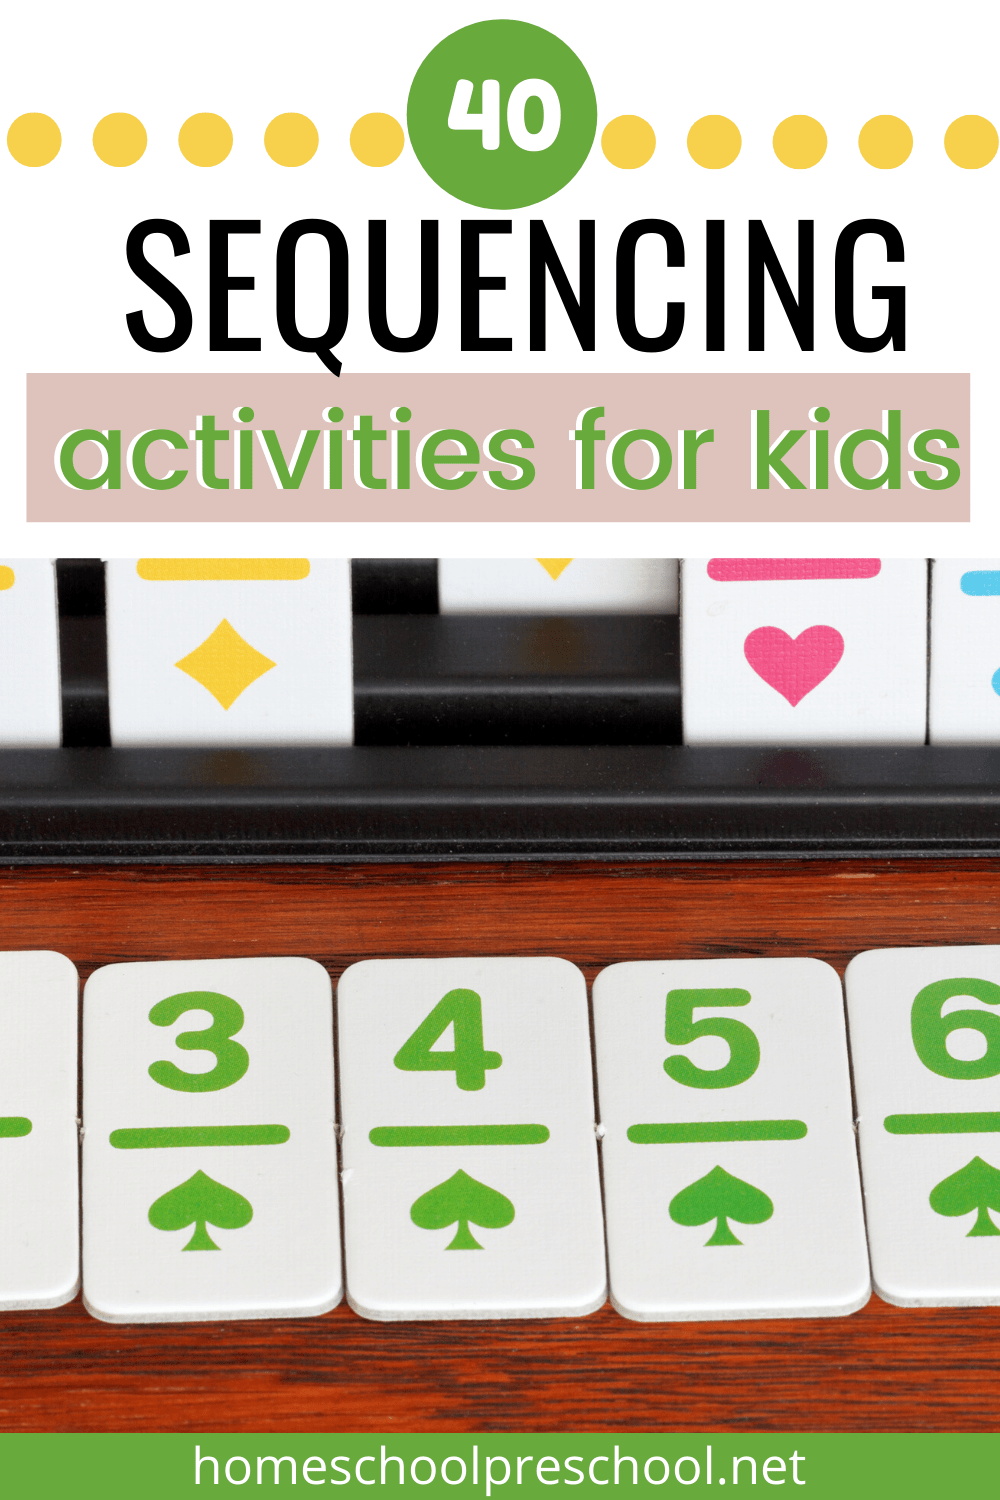 Discover more than 40 seasonal sequencing activities for preschoolers! Find activities for holidays and seasons all year long.